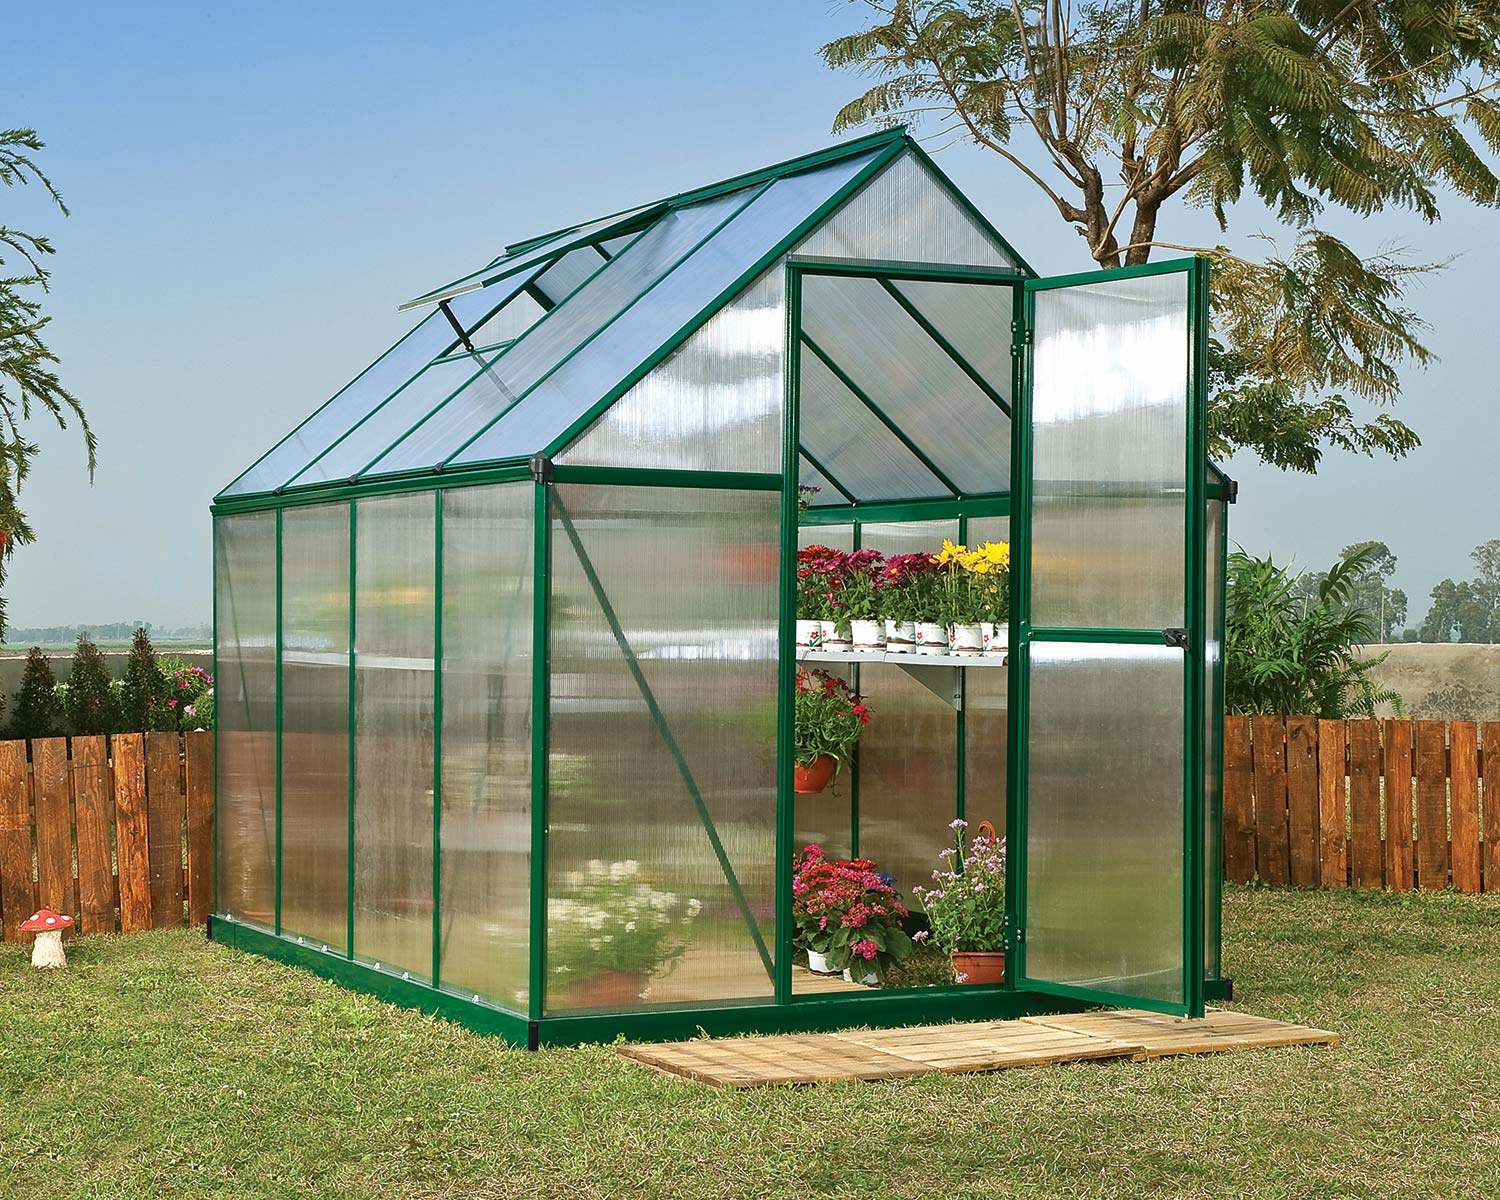 Mythos 6 ft. x 8 ft. Greenhouse Green Structure &amp; Twinwall Panels outside on a lawn